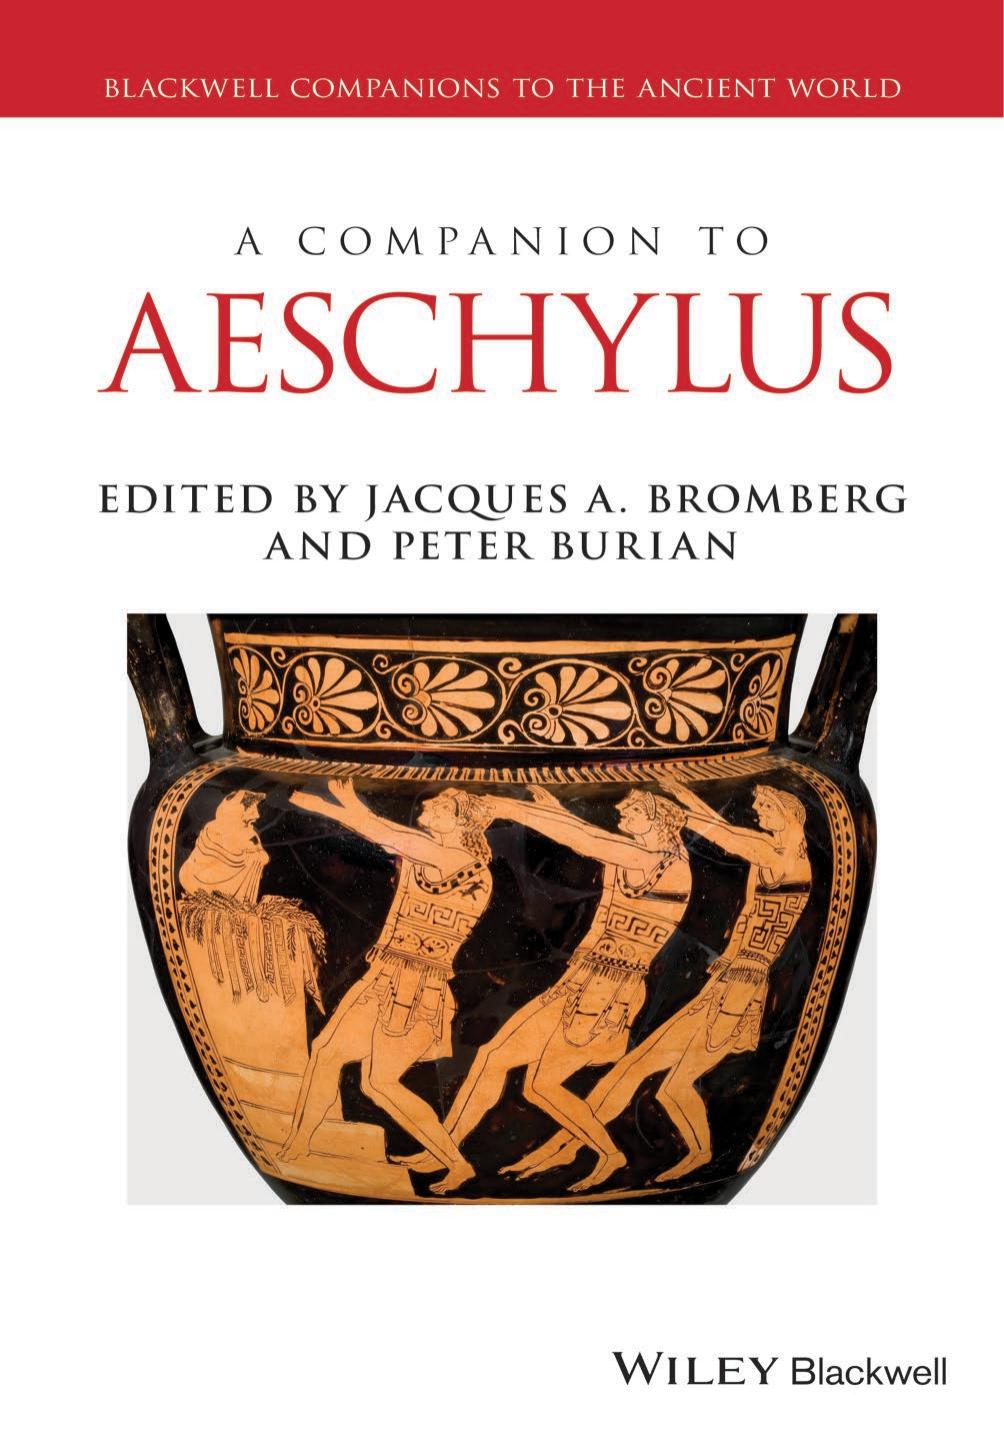 A Companion to Aeschylus by Jacques A. Bromberg (editor) Peter Burian (editor)